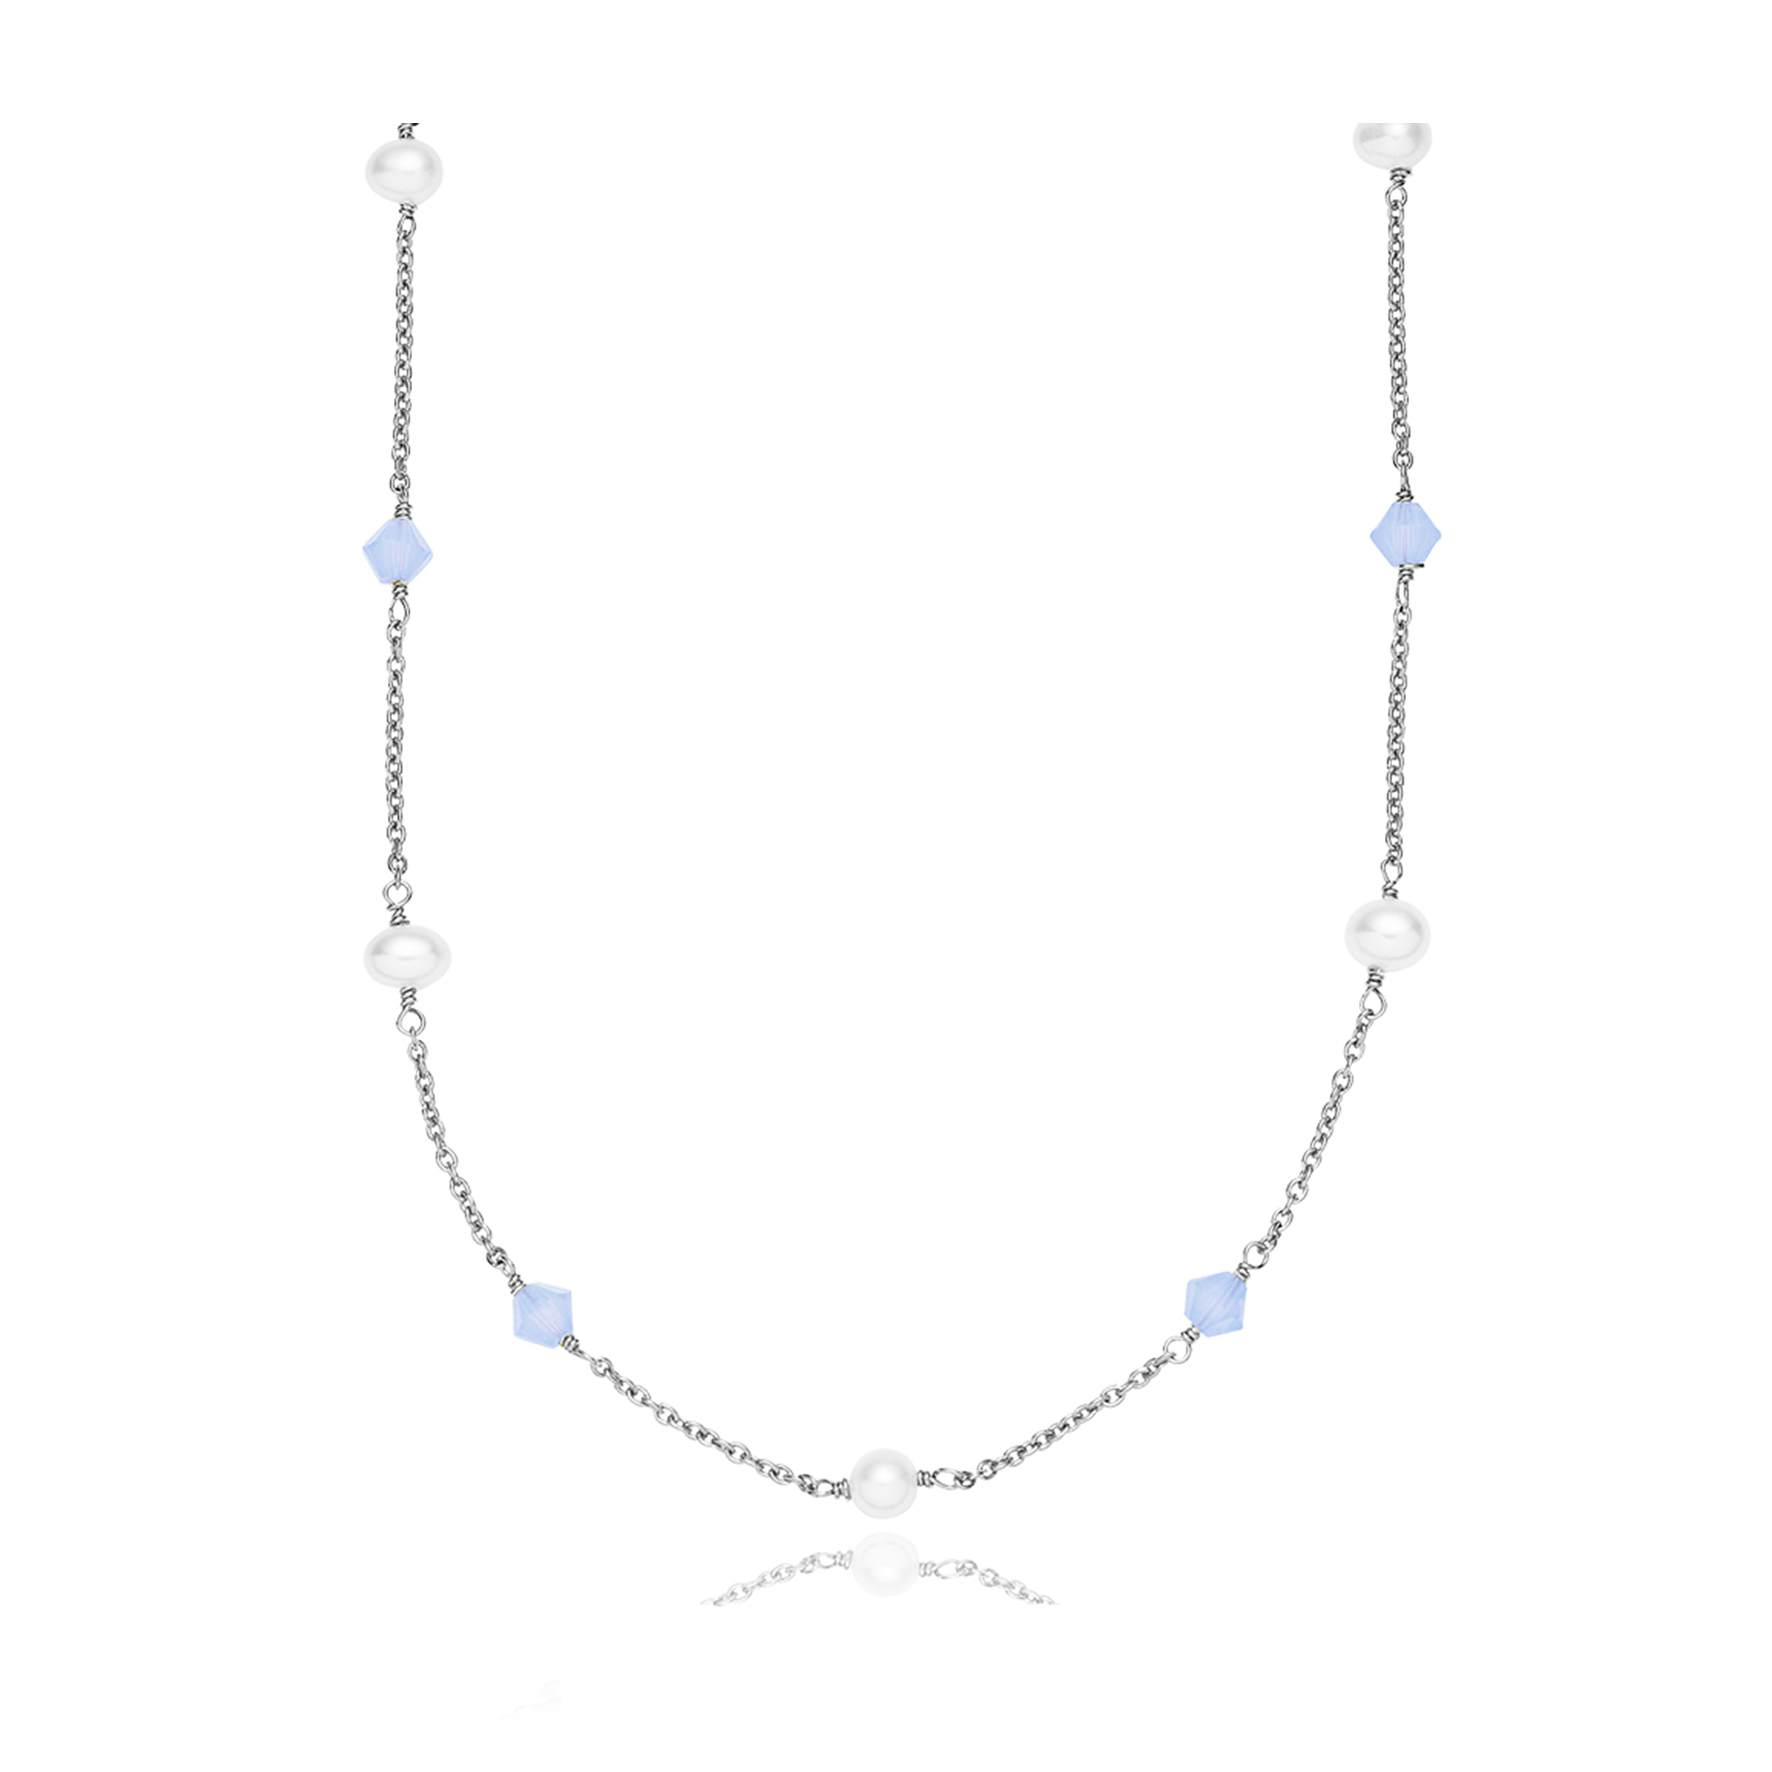 Olivia by Sistie Classic Necklace von Sistie in Silber Sterling 925